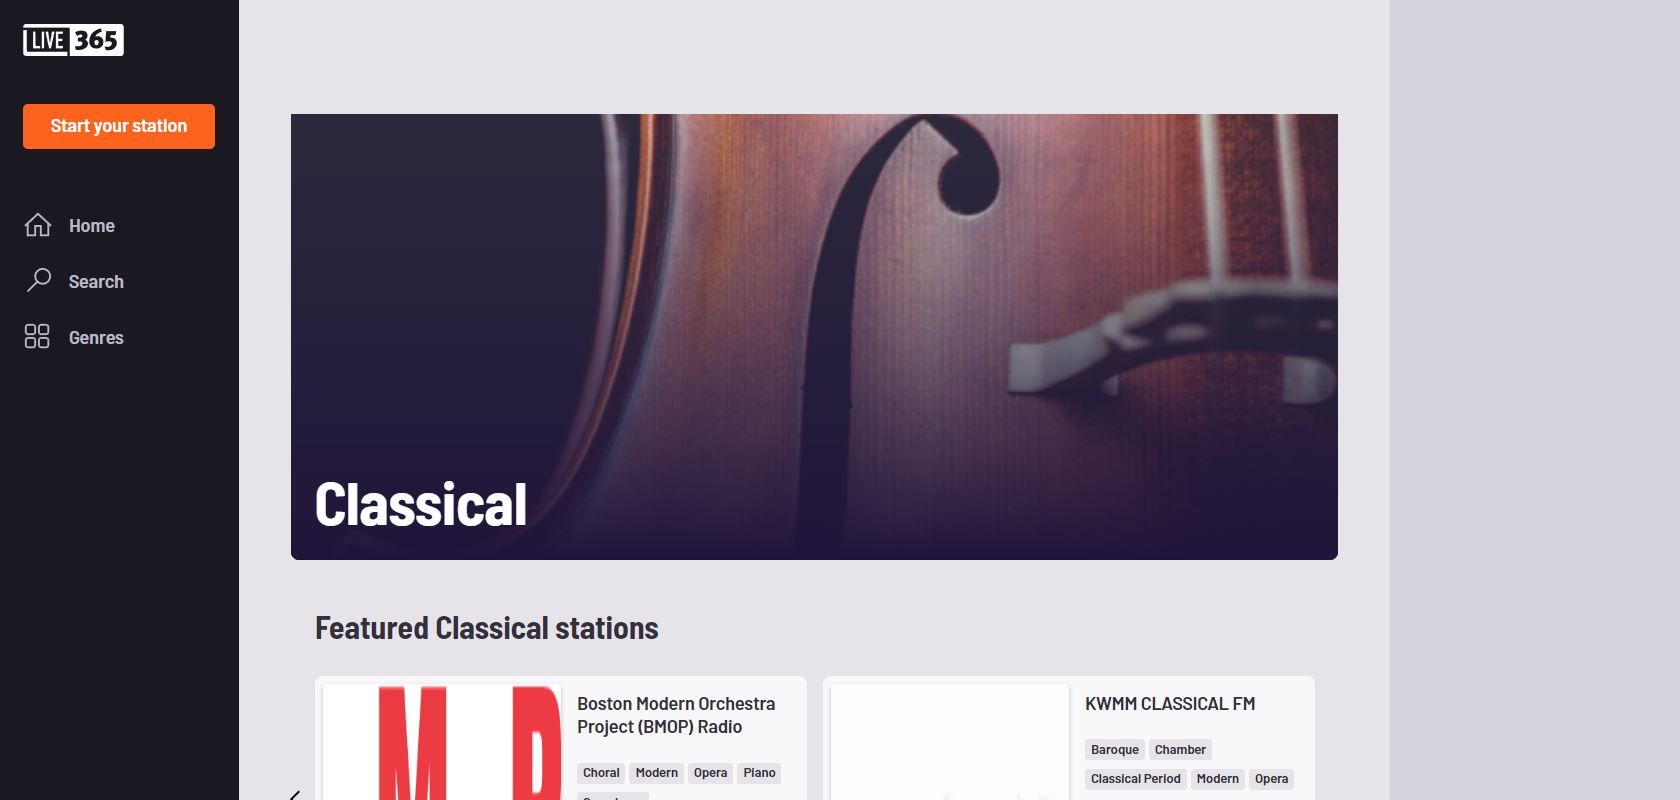 A Screenshot of Live 365 s Classical Landing Page